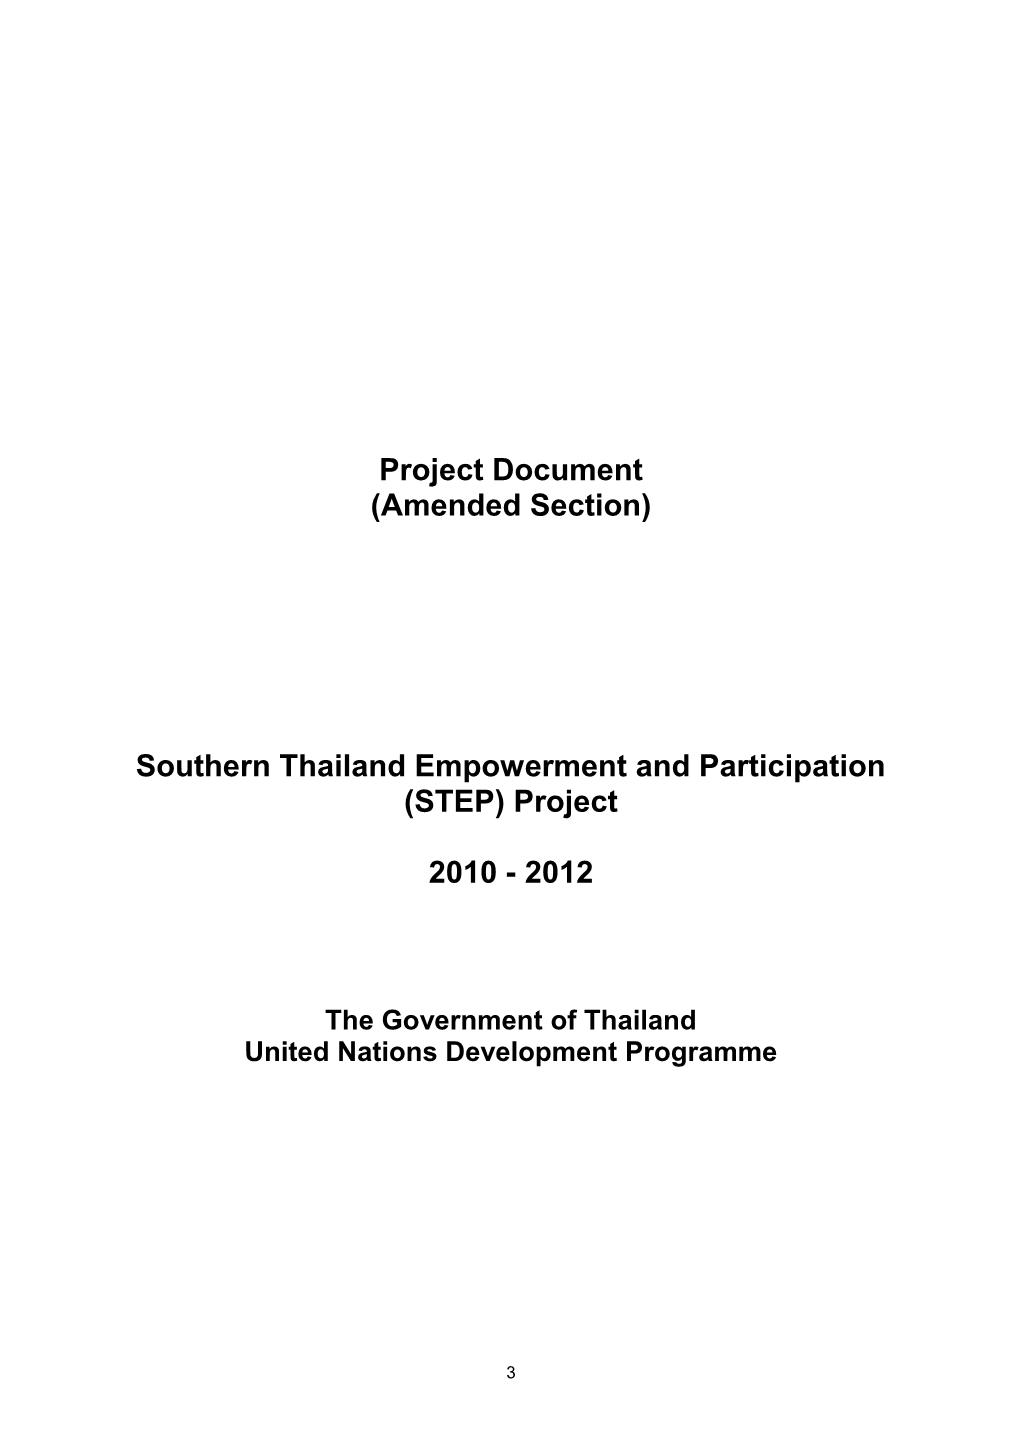 Southern Thailand Empowerment and Participation (STEP) Project